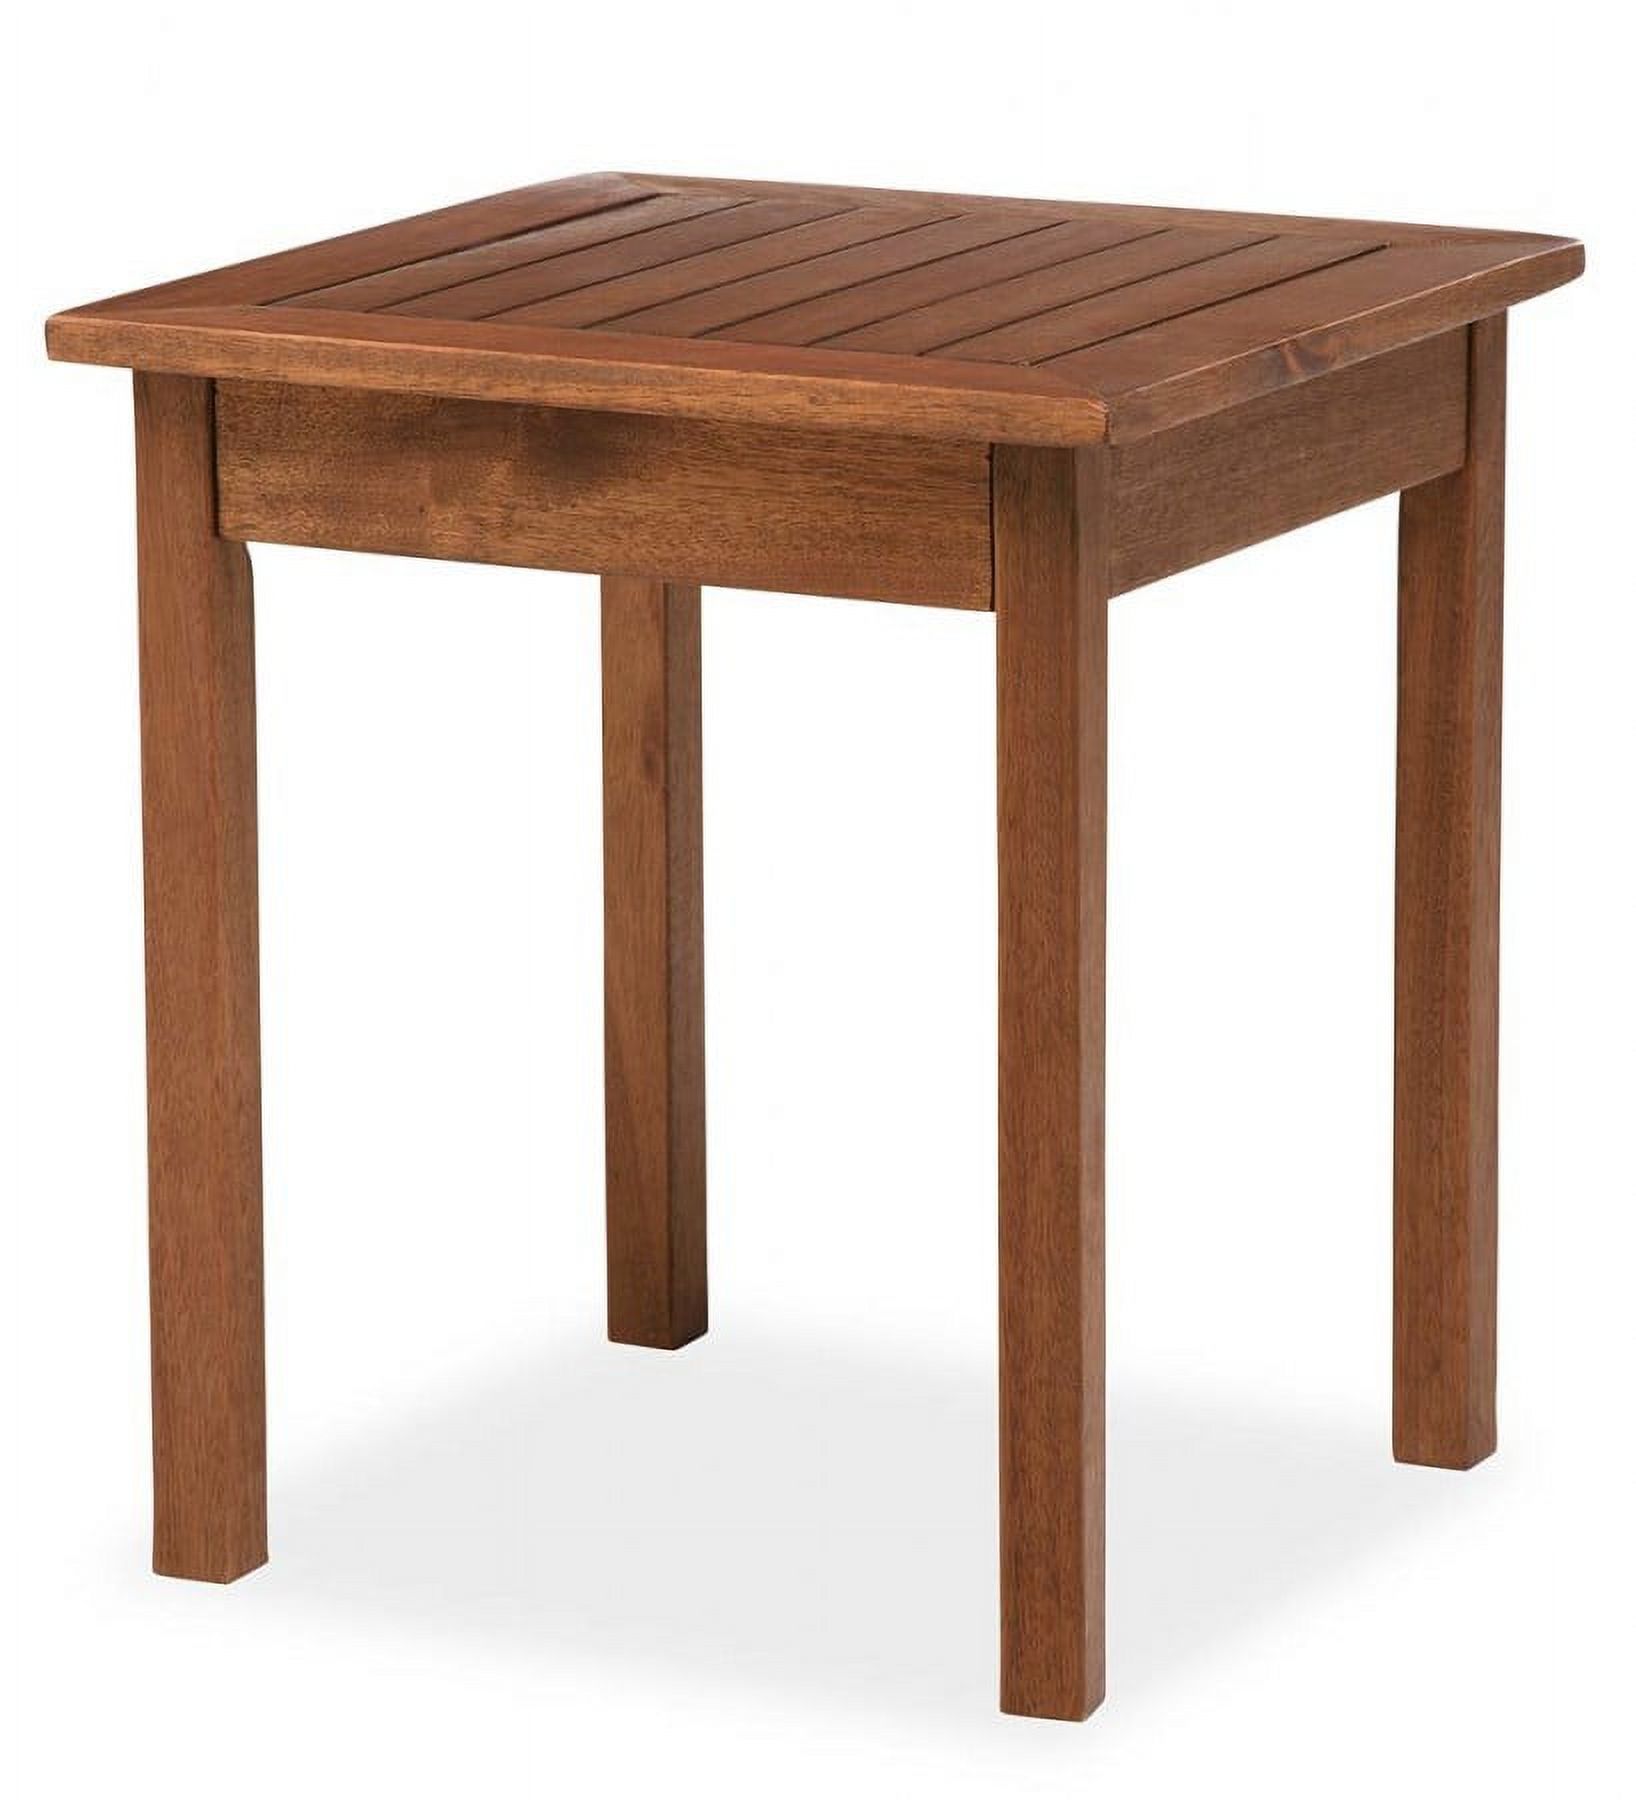 Plow & Hearth Eucalyptus Wood Outdoor Side Table, Lancaster Collection, in Natural - image 1 of 2